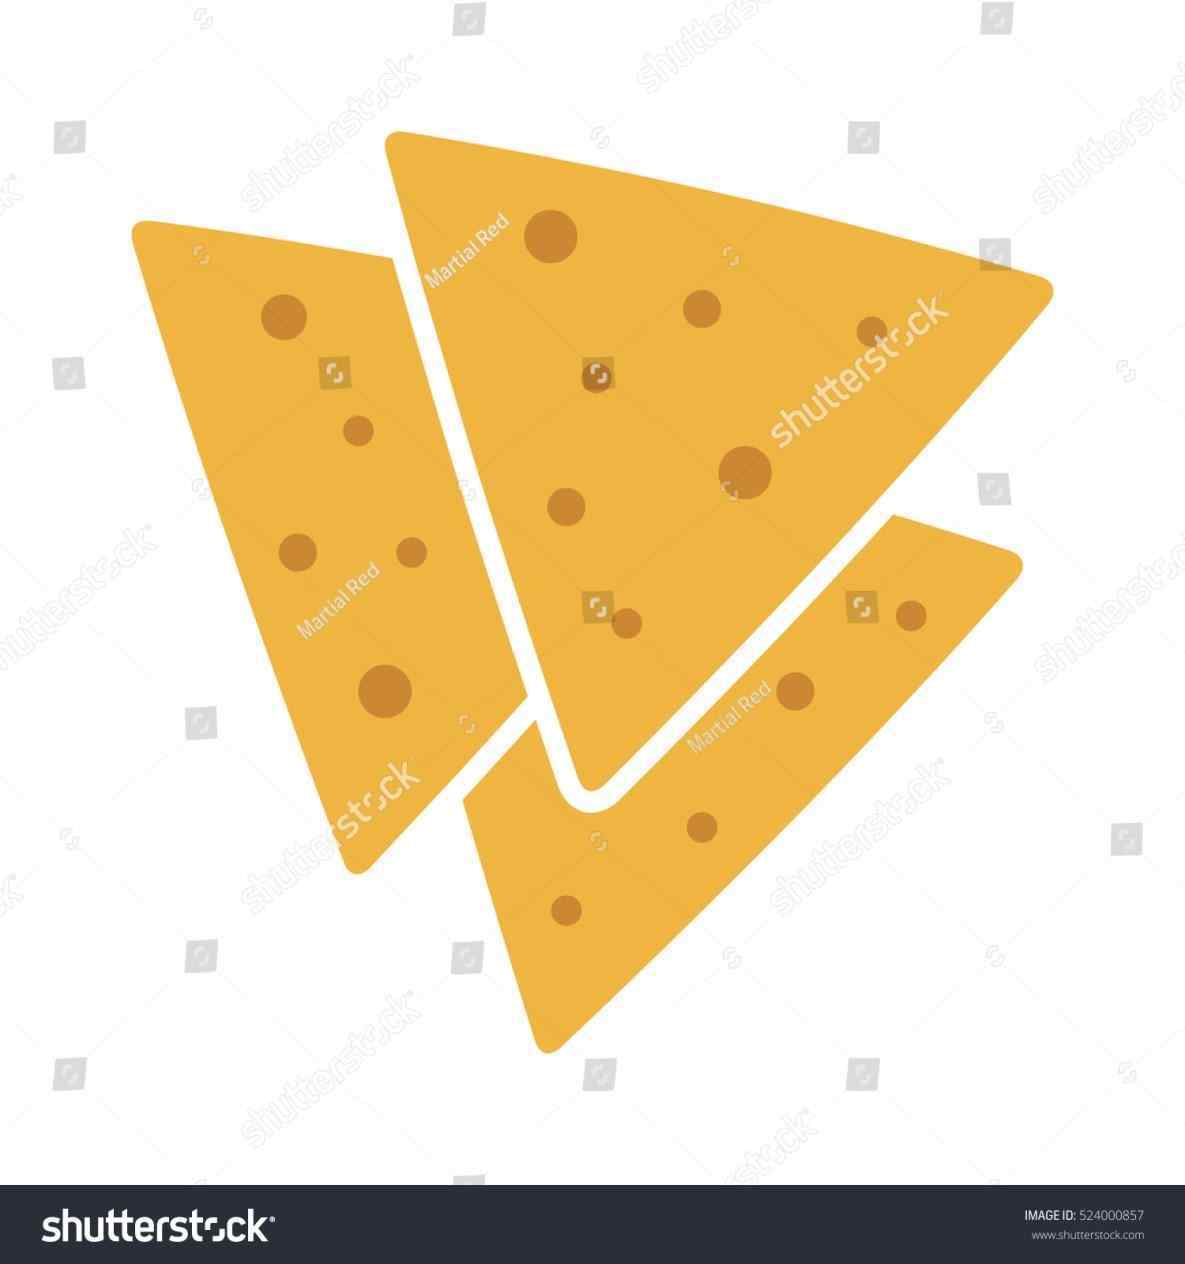 On stock photo wooden. Chips clipart bowl chip